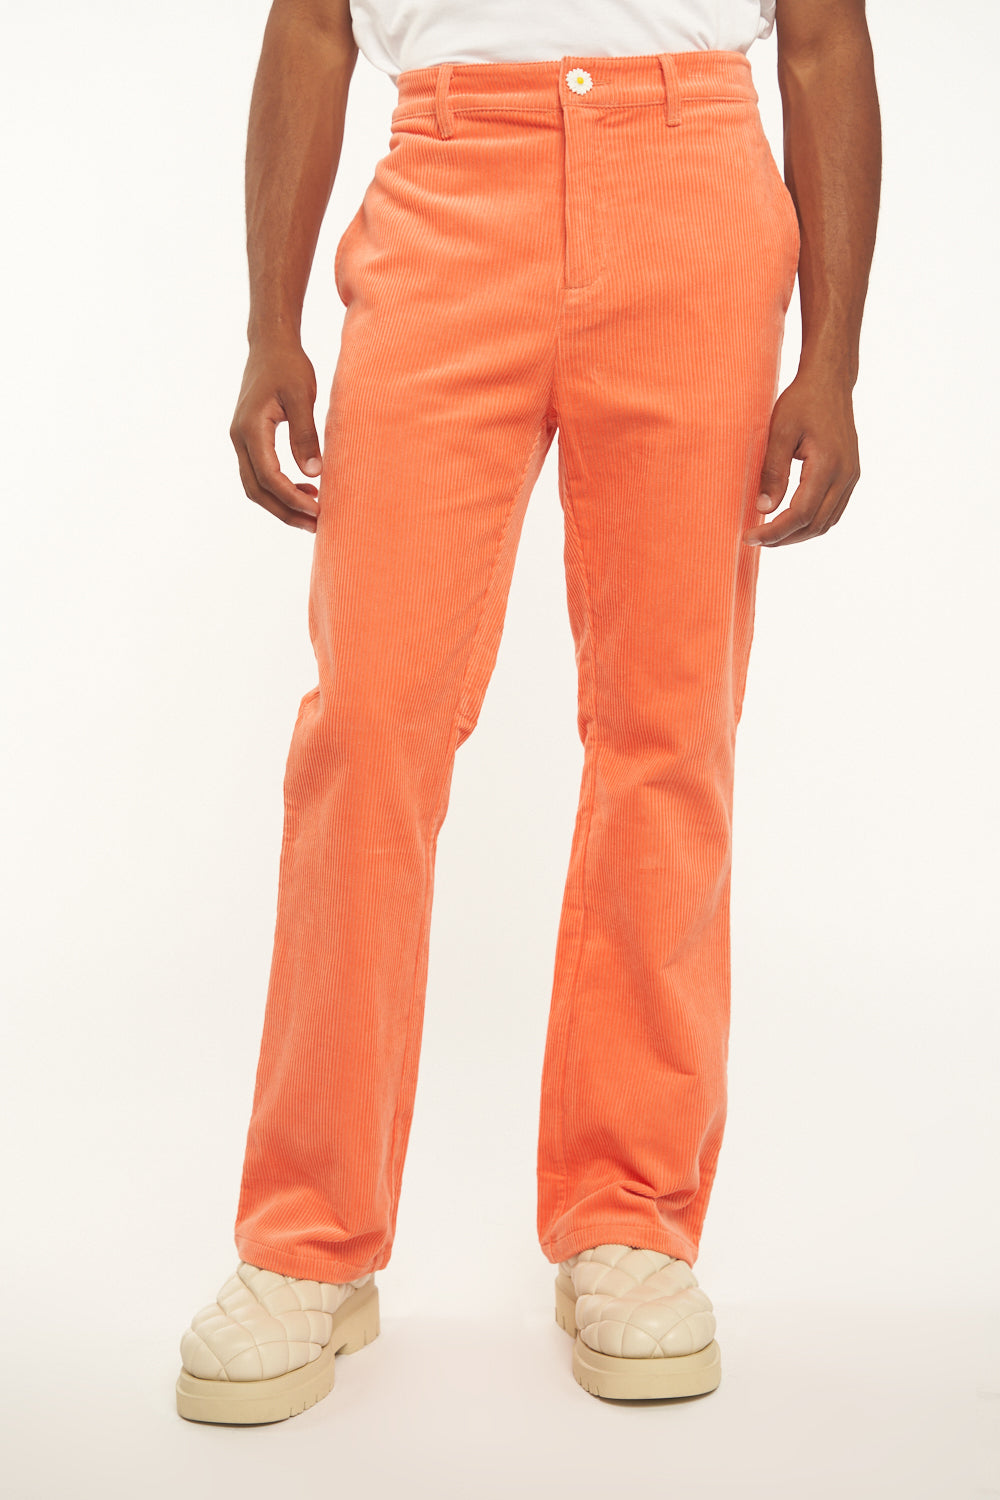 Conch Shell Corduroy Flared Trousers